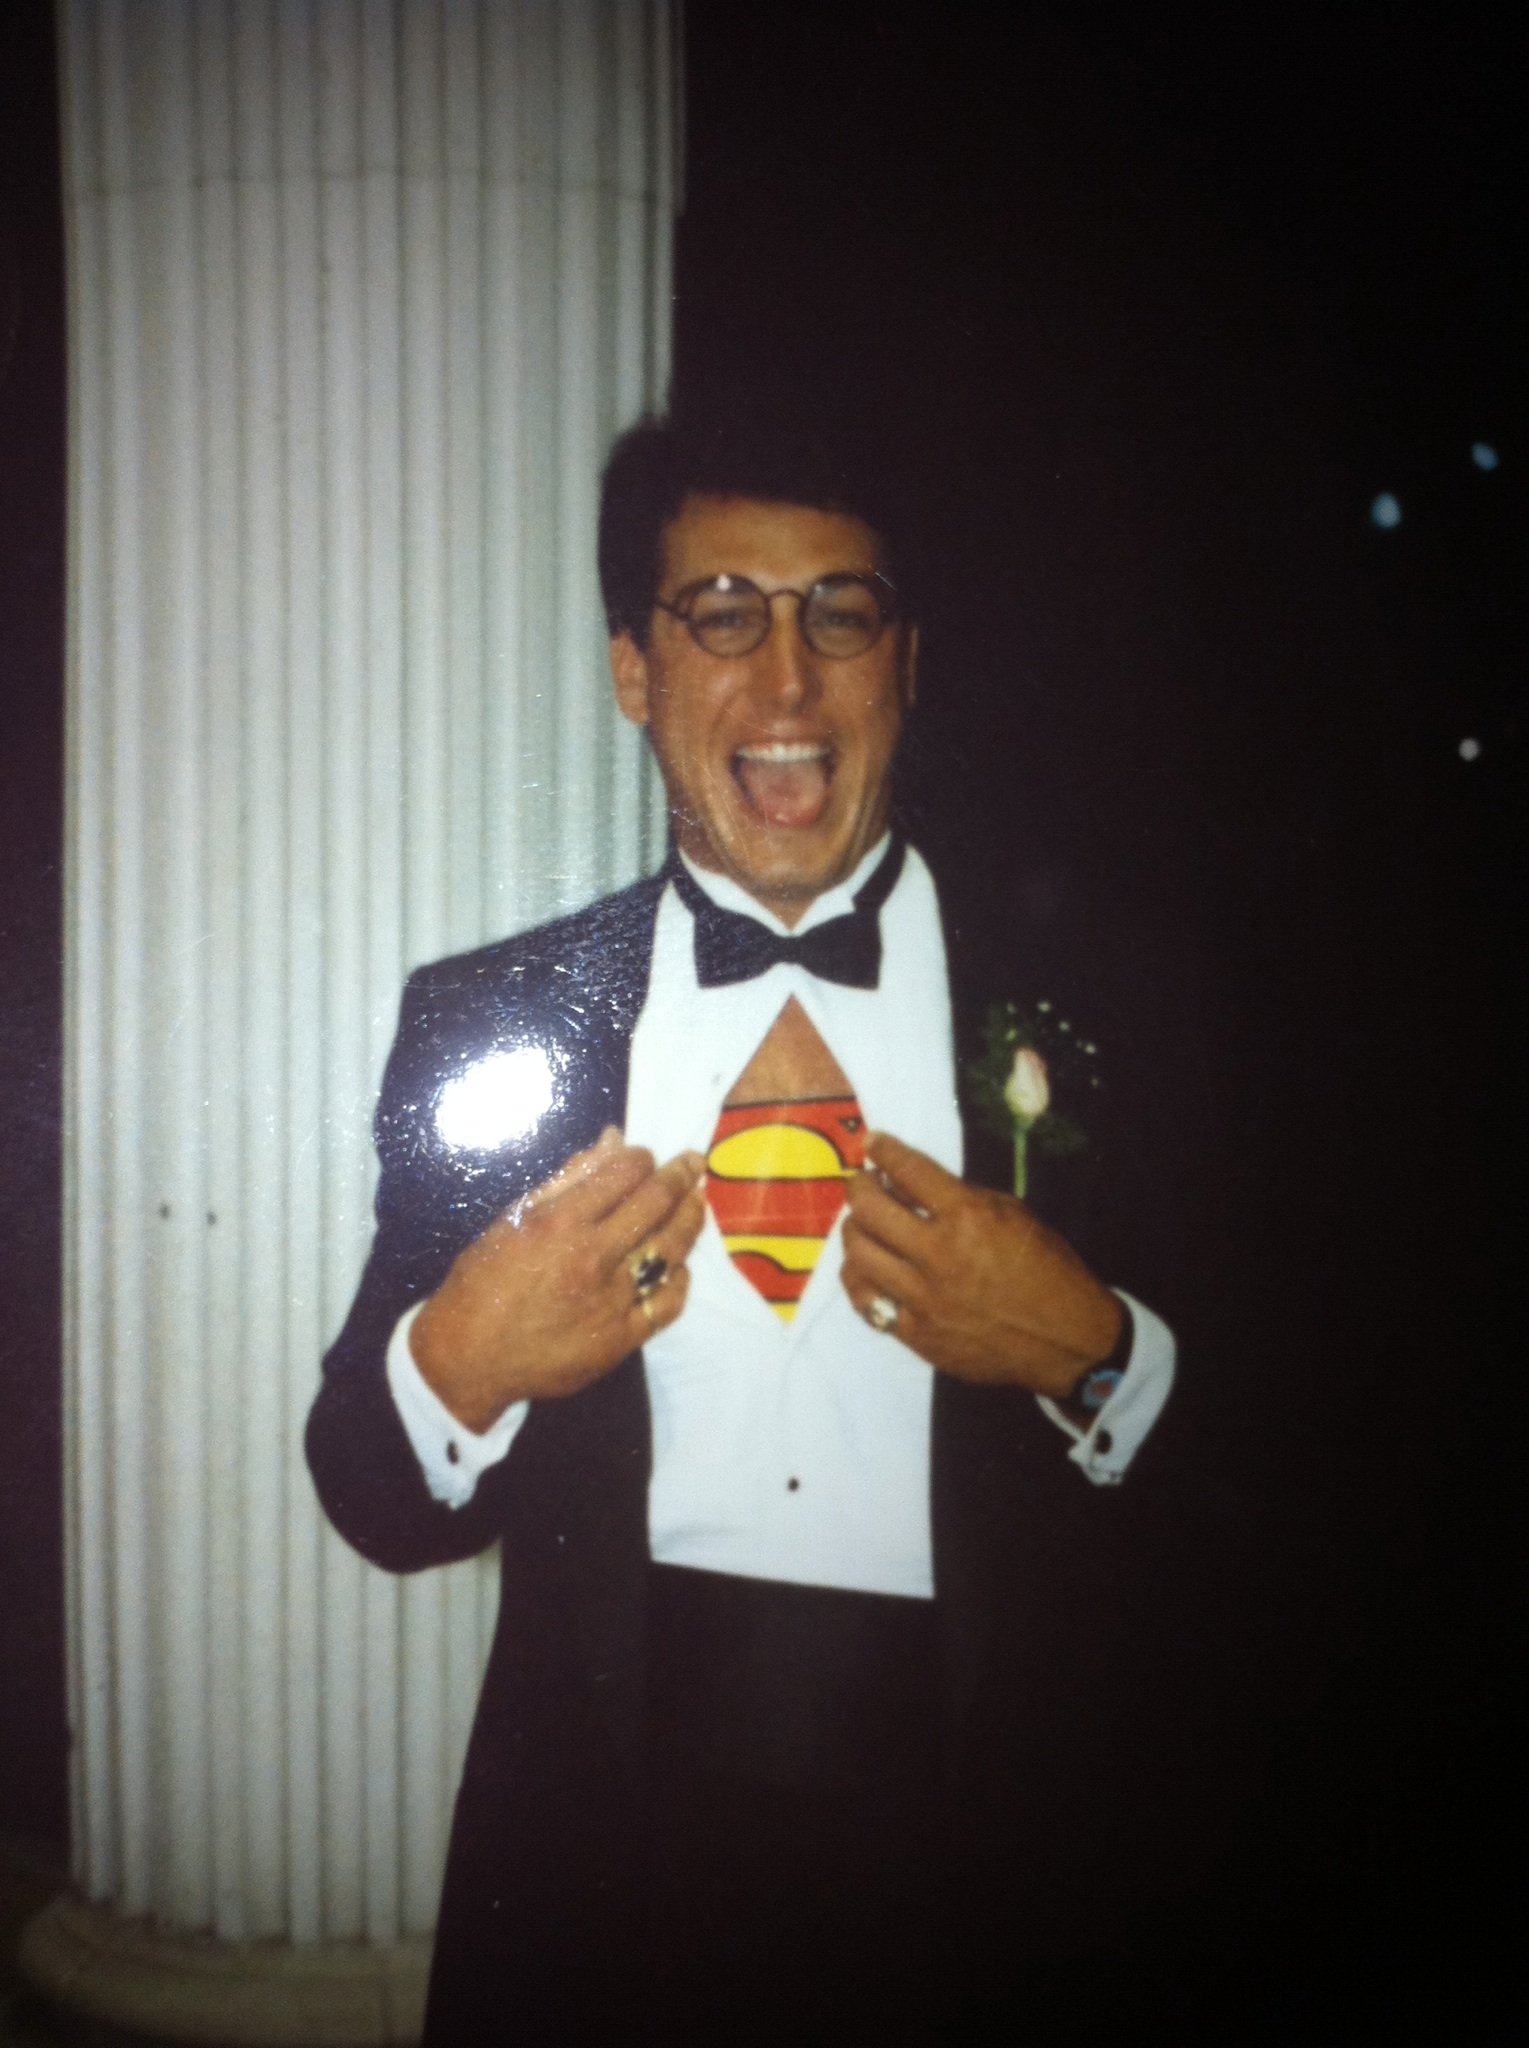 Superboy late 80s